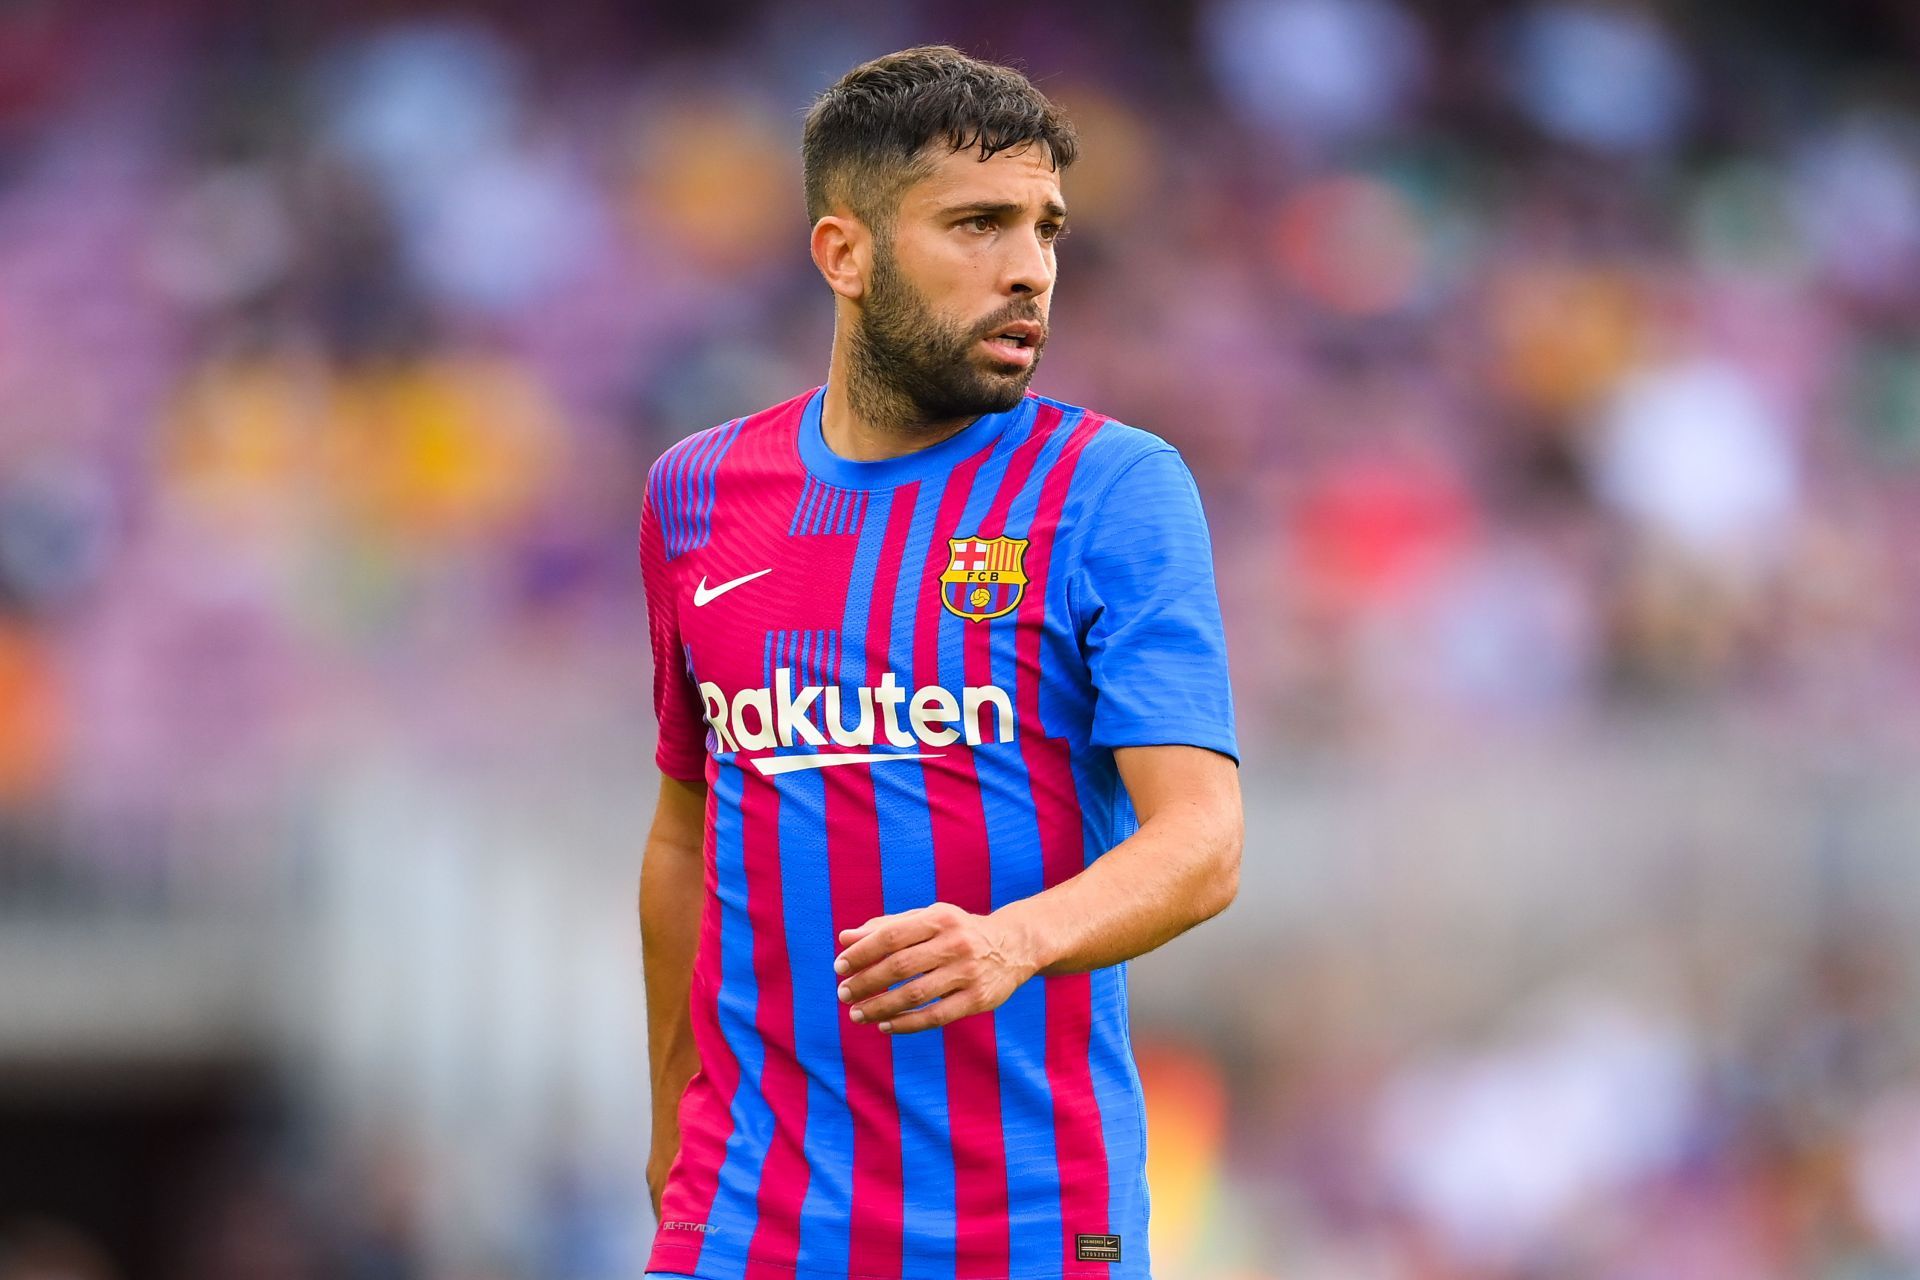 Alba was once released by the club citing his diminutive stature